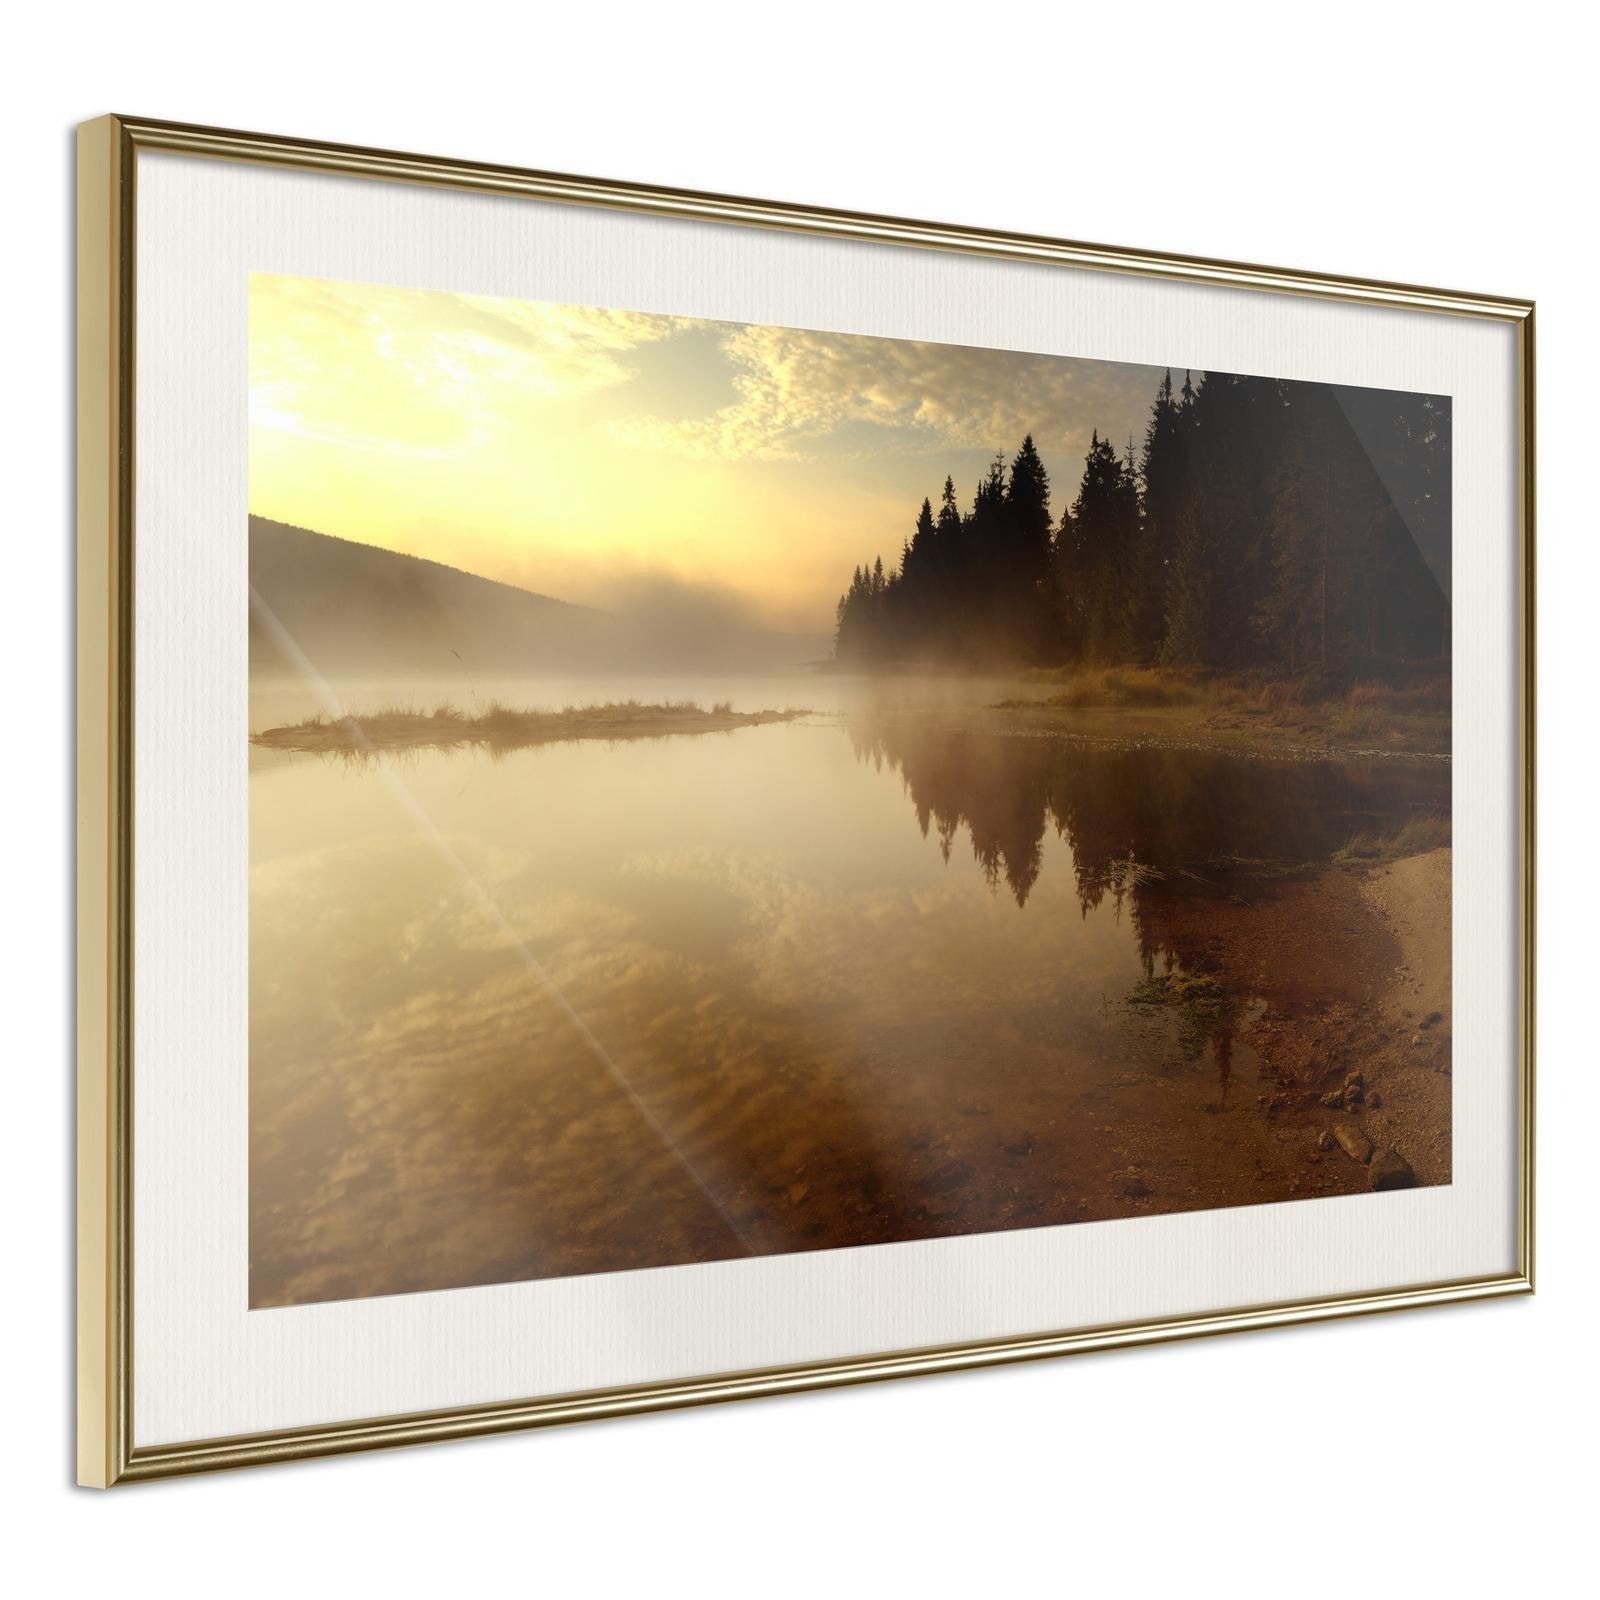 Inramad Poster / Tavla - Fog Over the Water-Poster Inramad-Artgeist-30x20-Guldram med passepartout-peaceofhome.se